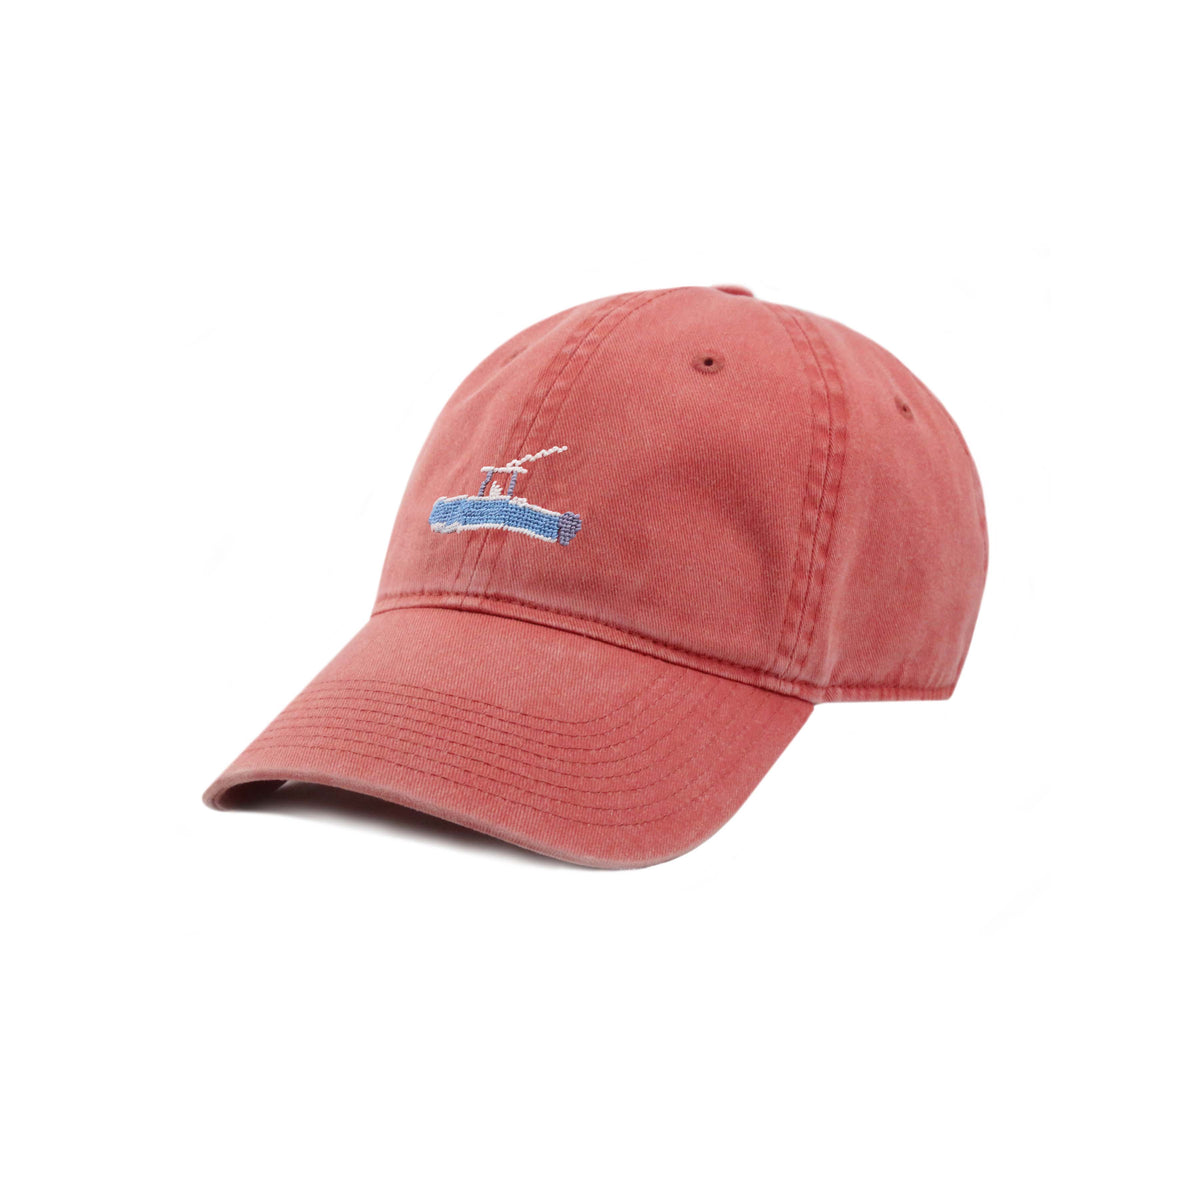 Power Boat Needlepoint Hat in Nantucket Red by Smathers & Branson - Country Club Prep